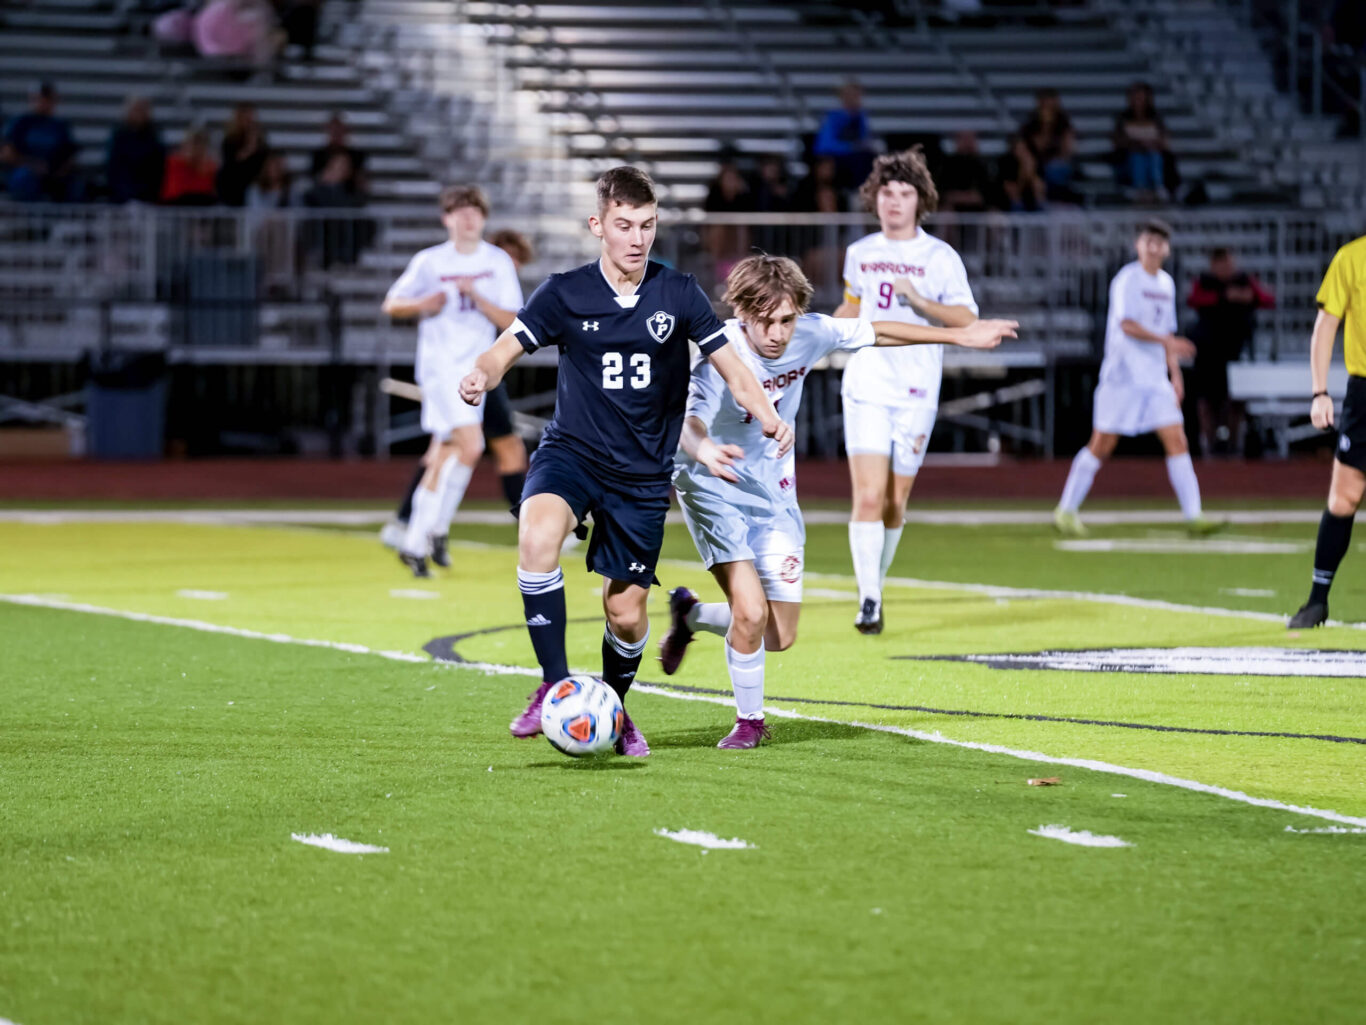 Two soccer boys running for the ball on a soccer field.